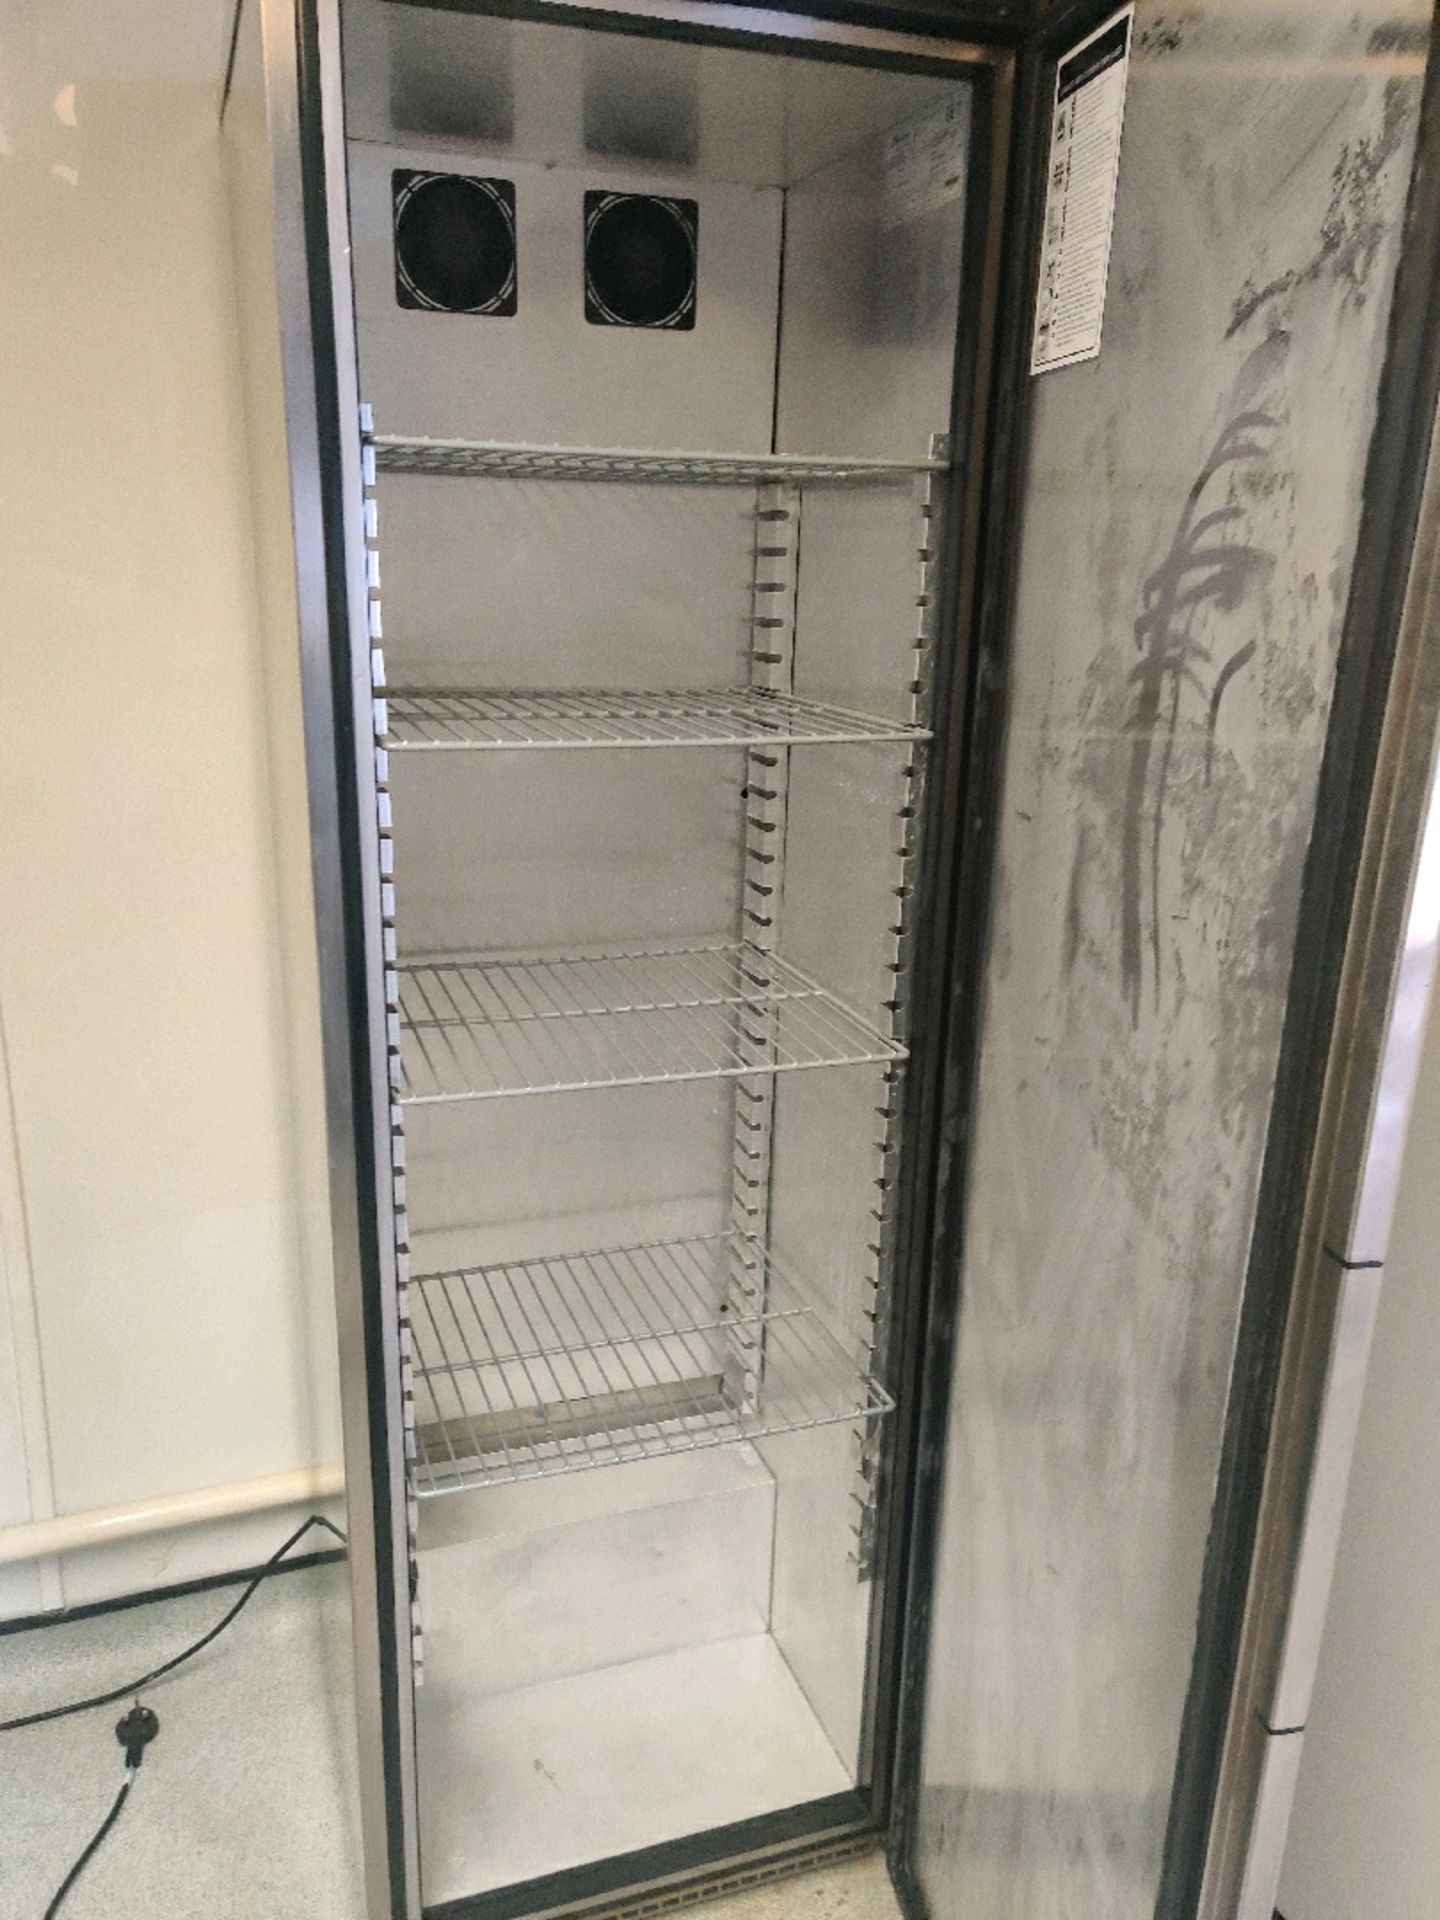 Fosters refrigeration - Image 2 of 3